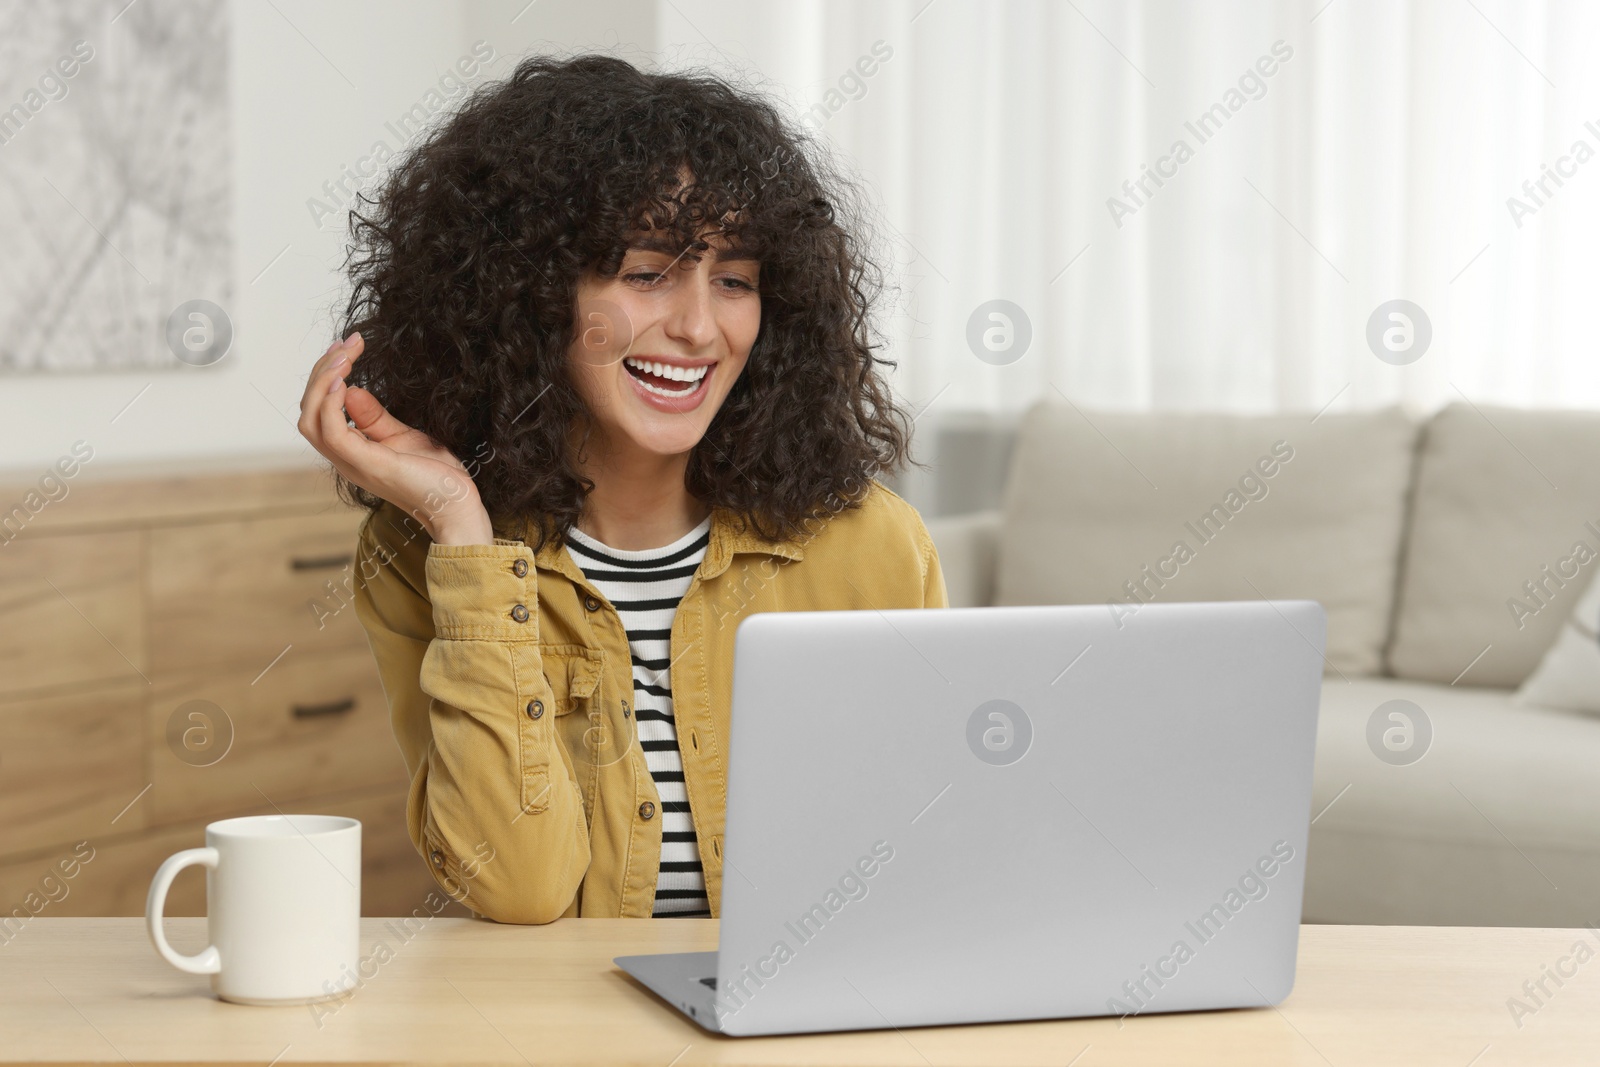 Photo of Happy woman having video chat via laptop at table in room